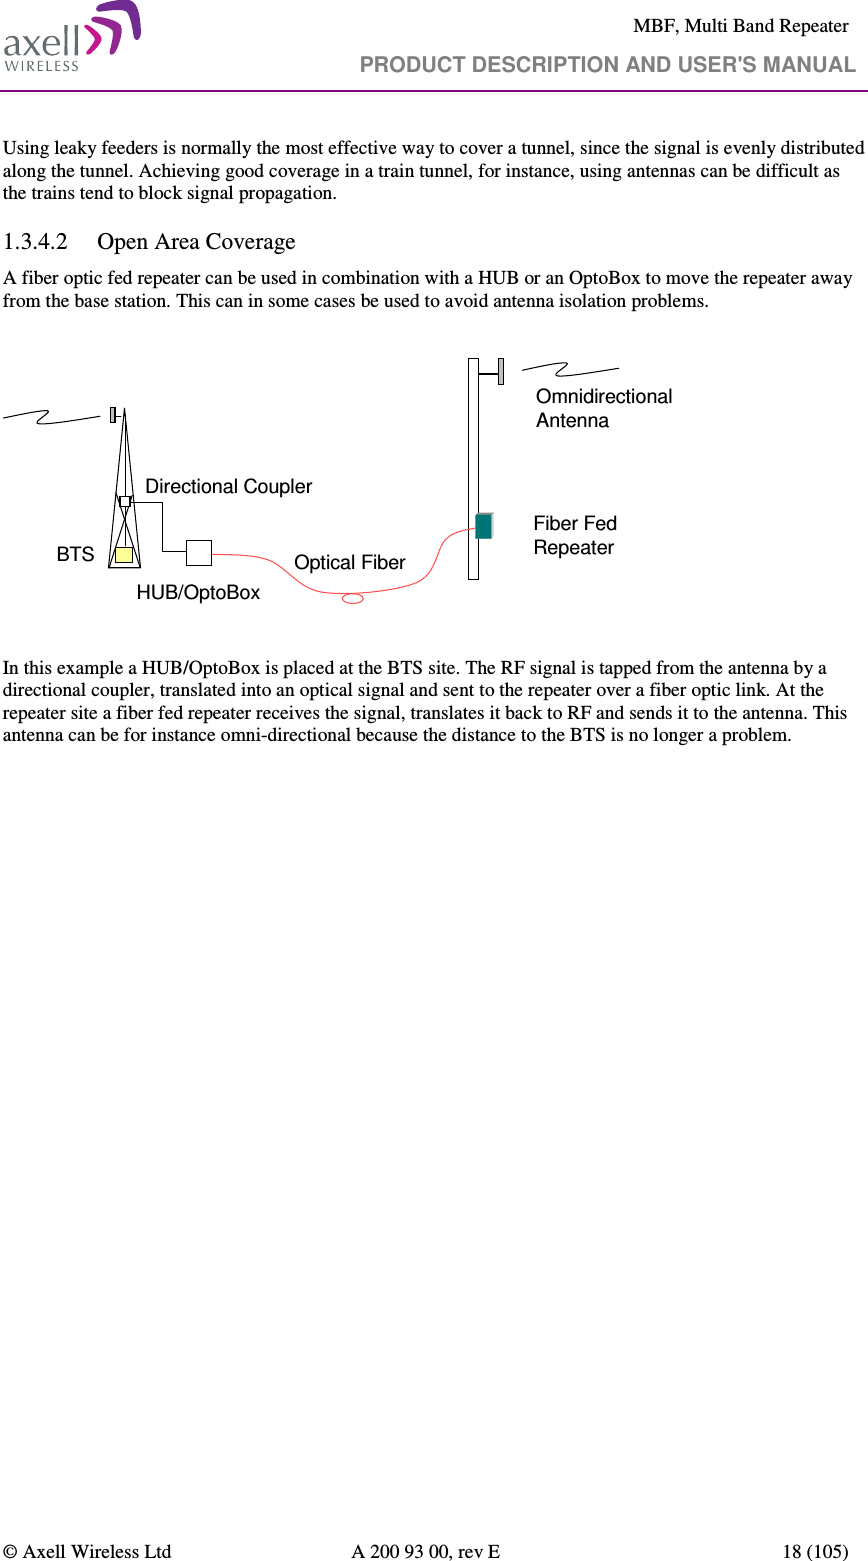     MBF, Multi Band Repeater                                     PRODUCT DESCRIPTION AND USER&apos;S MANUAL   © Axell Wireless Ltd  A 200 93 00, rev E  18 (105)  Using leaky feeders is normally the most effective way to cover a tunnel, since the signal is evenly distributed along the tunnel. Achieving good coverage in a train tunnel, for instance, using antennas can be difficult as the trains tend to block signal propagation.  1.3.4.2 Open Area Coverage A fiber optic fed repeater can be used in combination with a HUB or an OptoBox to move the repeater away from the base station. This can in some cases be used to avoid antenna isolation problems.  BTSHUB/OptoBoxFiber Fed RepeaterOptical FiberOmnidirectionalAntennaDirectional Coupler  In this example a HUB/OptoBox is placed at the BTS site. The RF signal is tapped from the antenna by a directional coupler, translated into an optical signal and sent to the repeater over a fiber optic link. At the repeater site a fiber fed repeater receives the signal, translates it back to RF and sends it to the antenna. This antenna can be for instance omni-directional because the distance to the BTS is no longer a problem.  